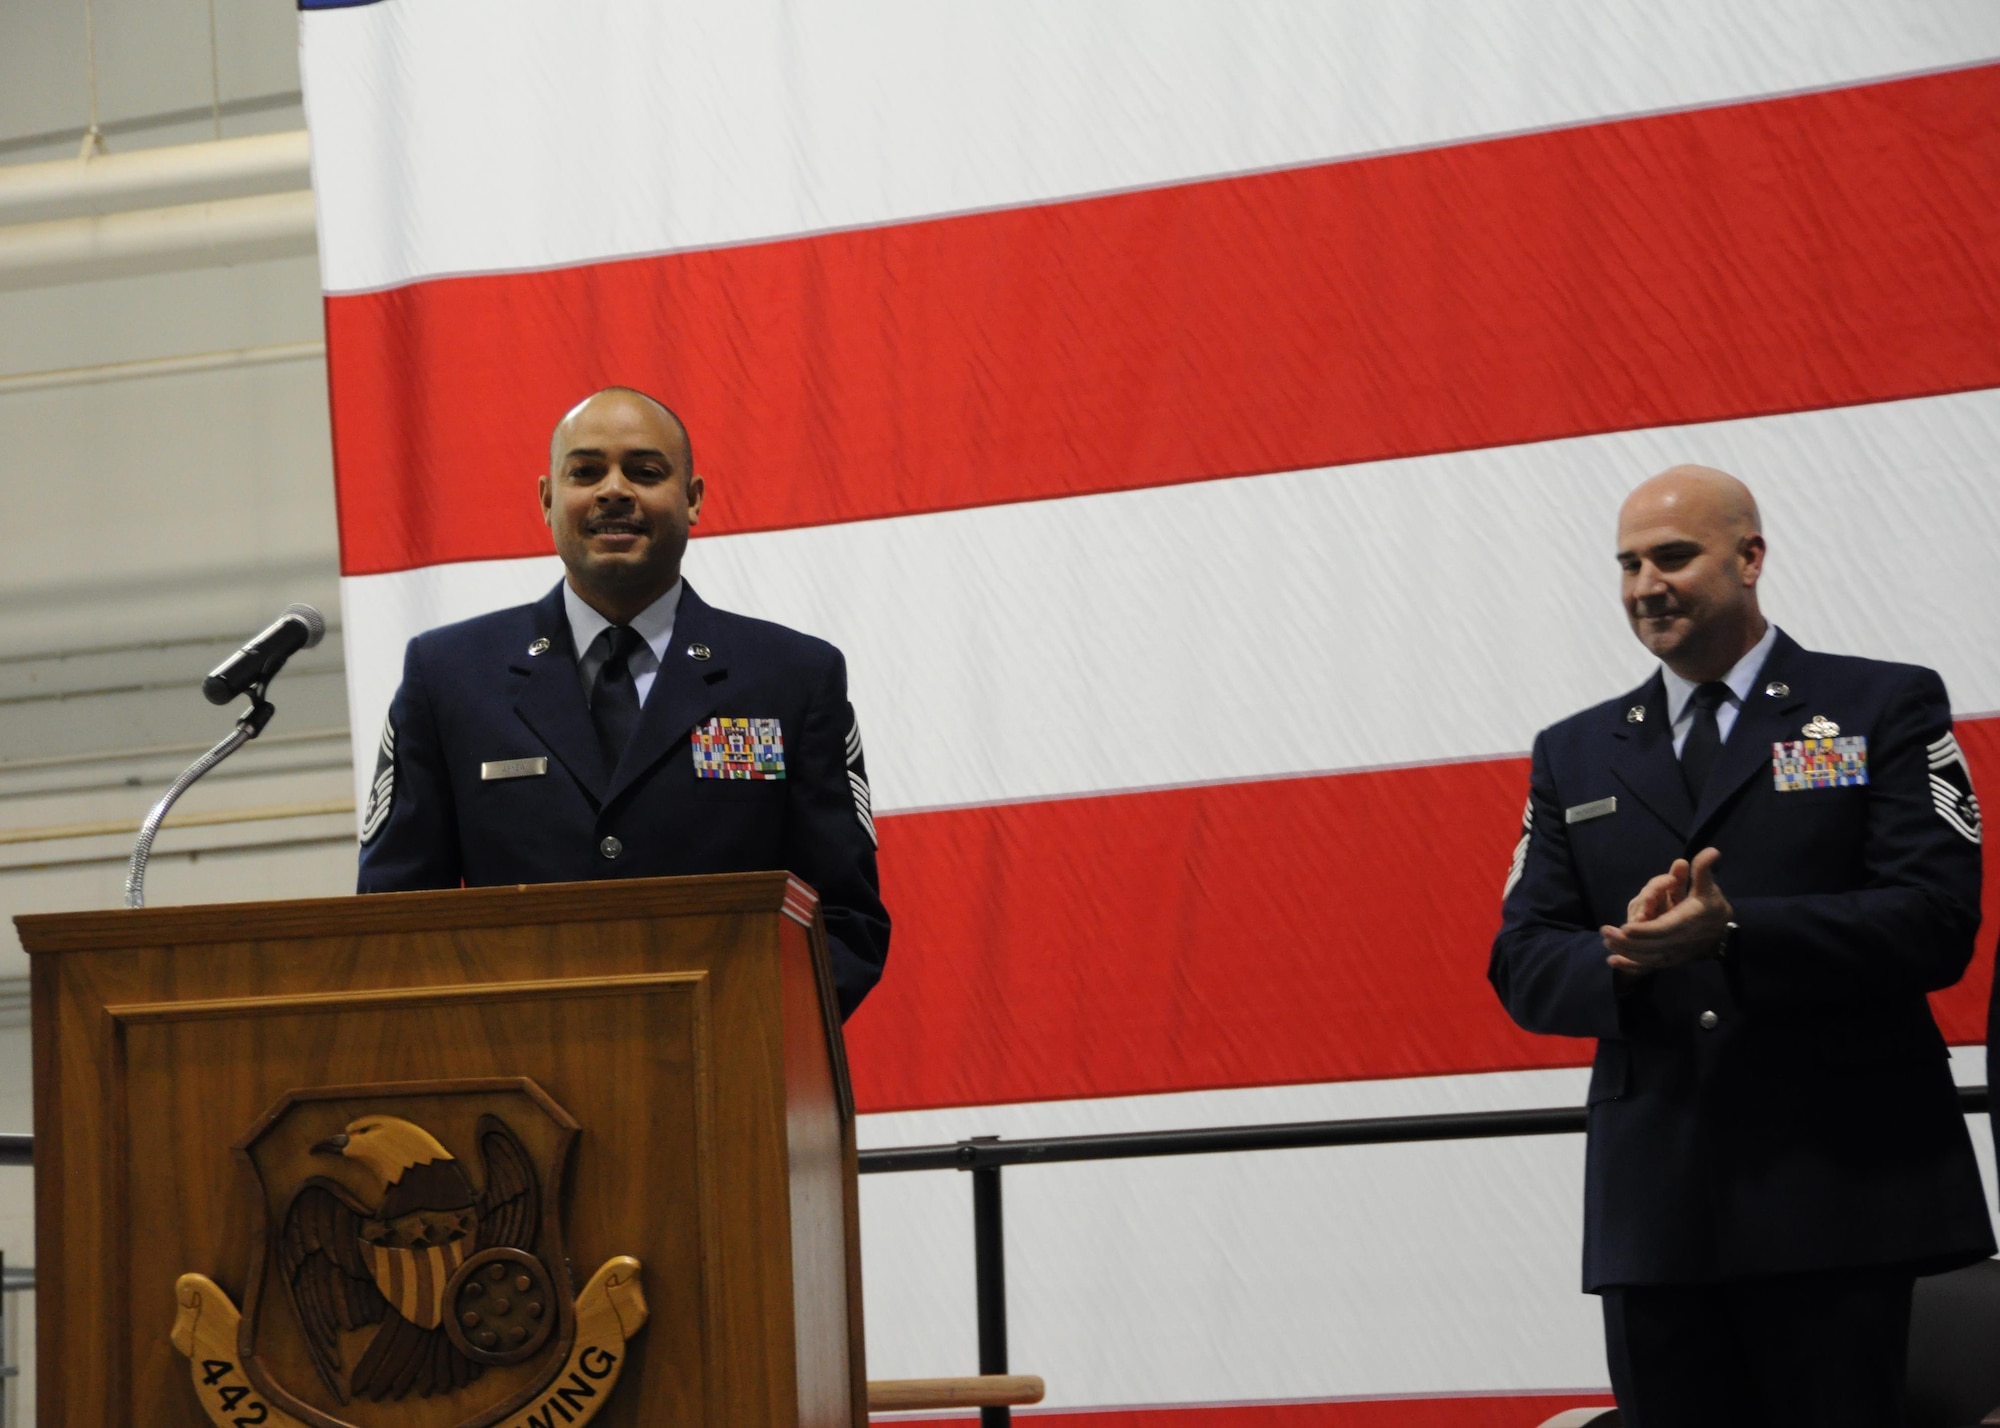 U.S. Air Force Chief Master Sgt. Kellie Askew, 442d Aircraft Maintenance Squadron deputy superintendent, address the audience during his promotion ceremony at Whiteman Air Force Base, Missouri, Jan. 7, 2017. Askew began his Air Force career as an F-16 crew chief at Hill AFB, Utah. (U.S. Air Force photo/Senior Airman Missy Sterling)